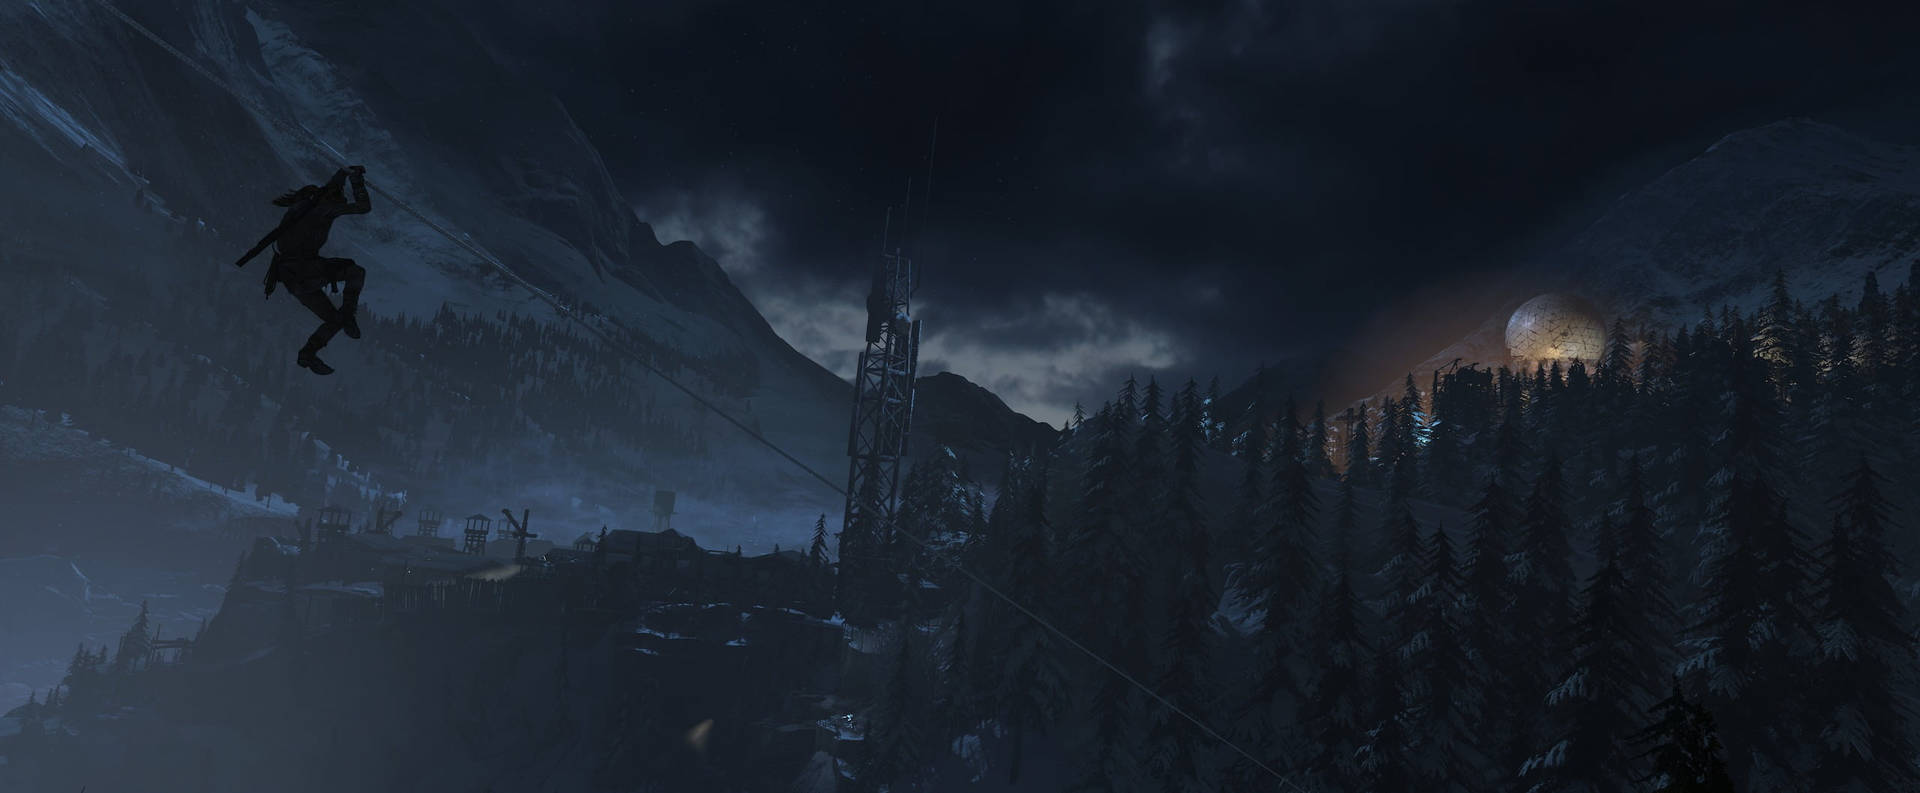 Rise Of The Tomb Raider Zip Line Background